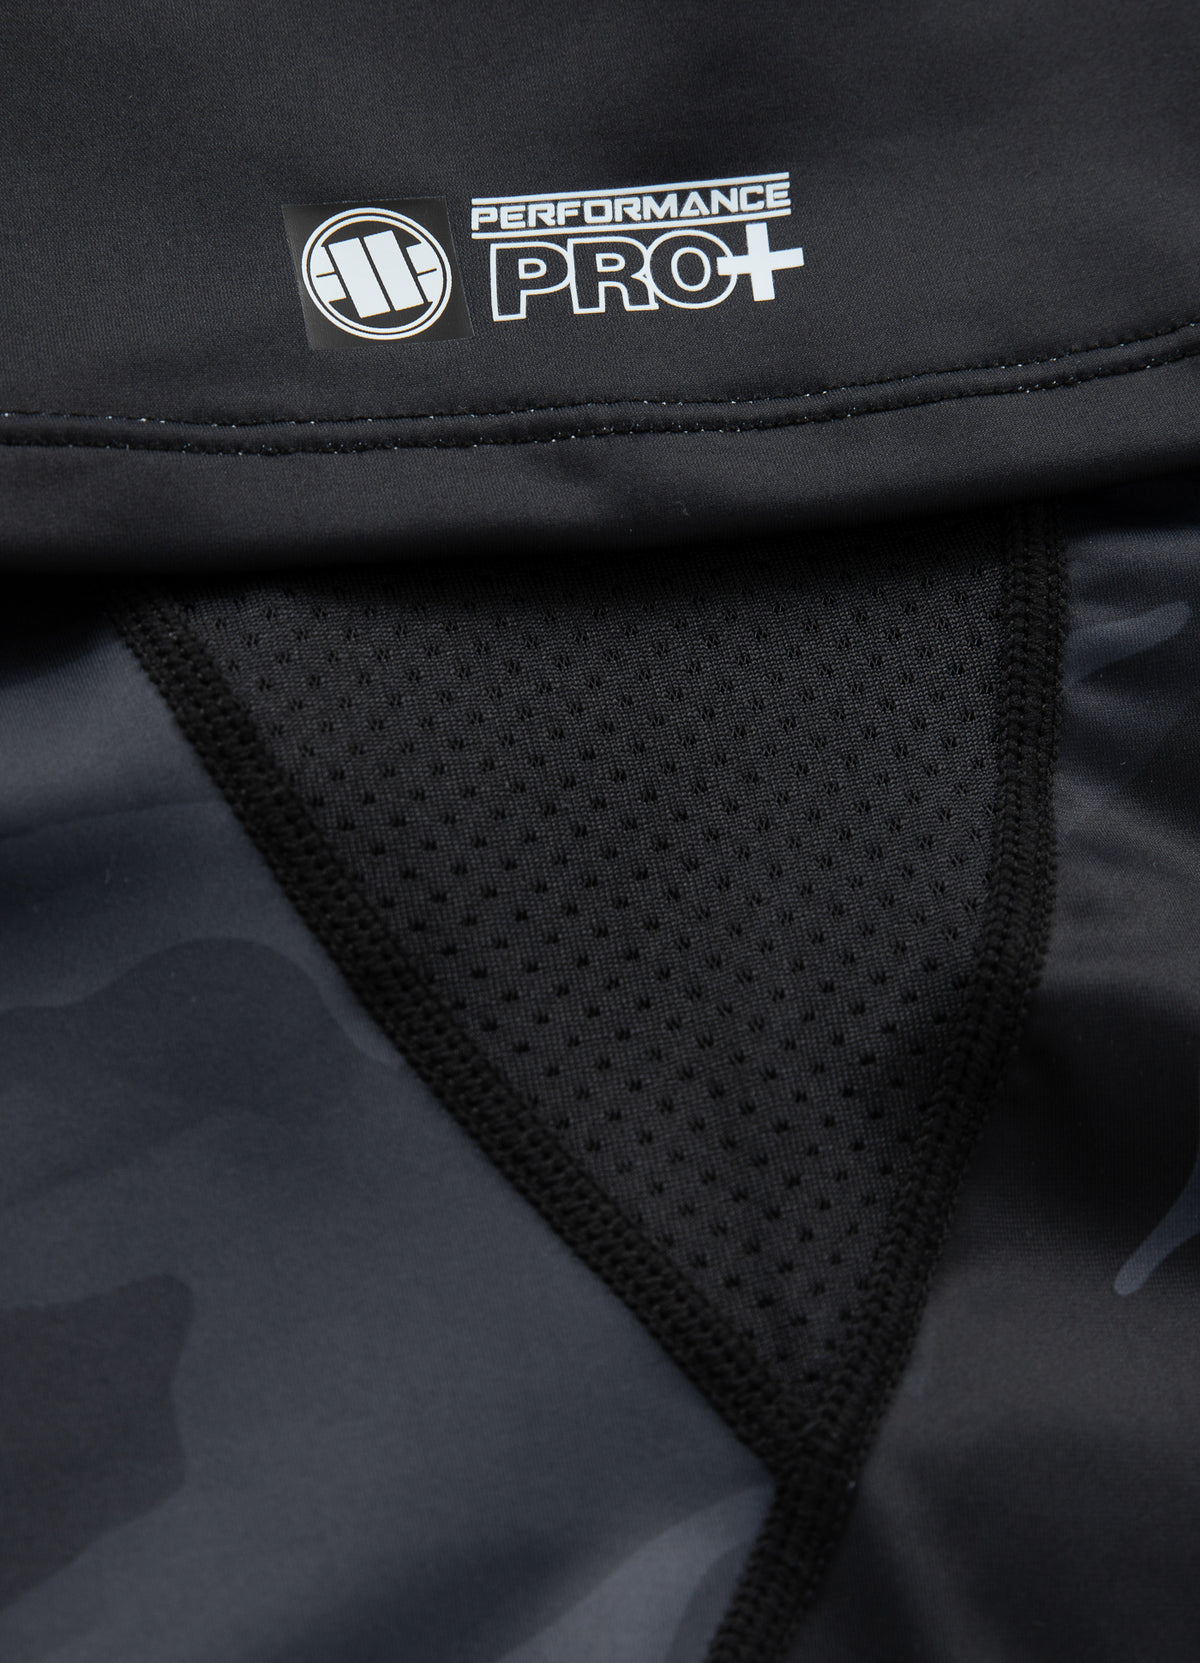 ADCC fitted  All Black Camo Rash Guard.